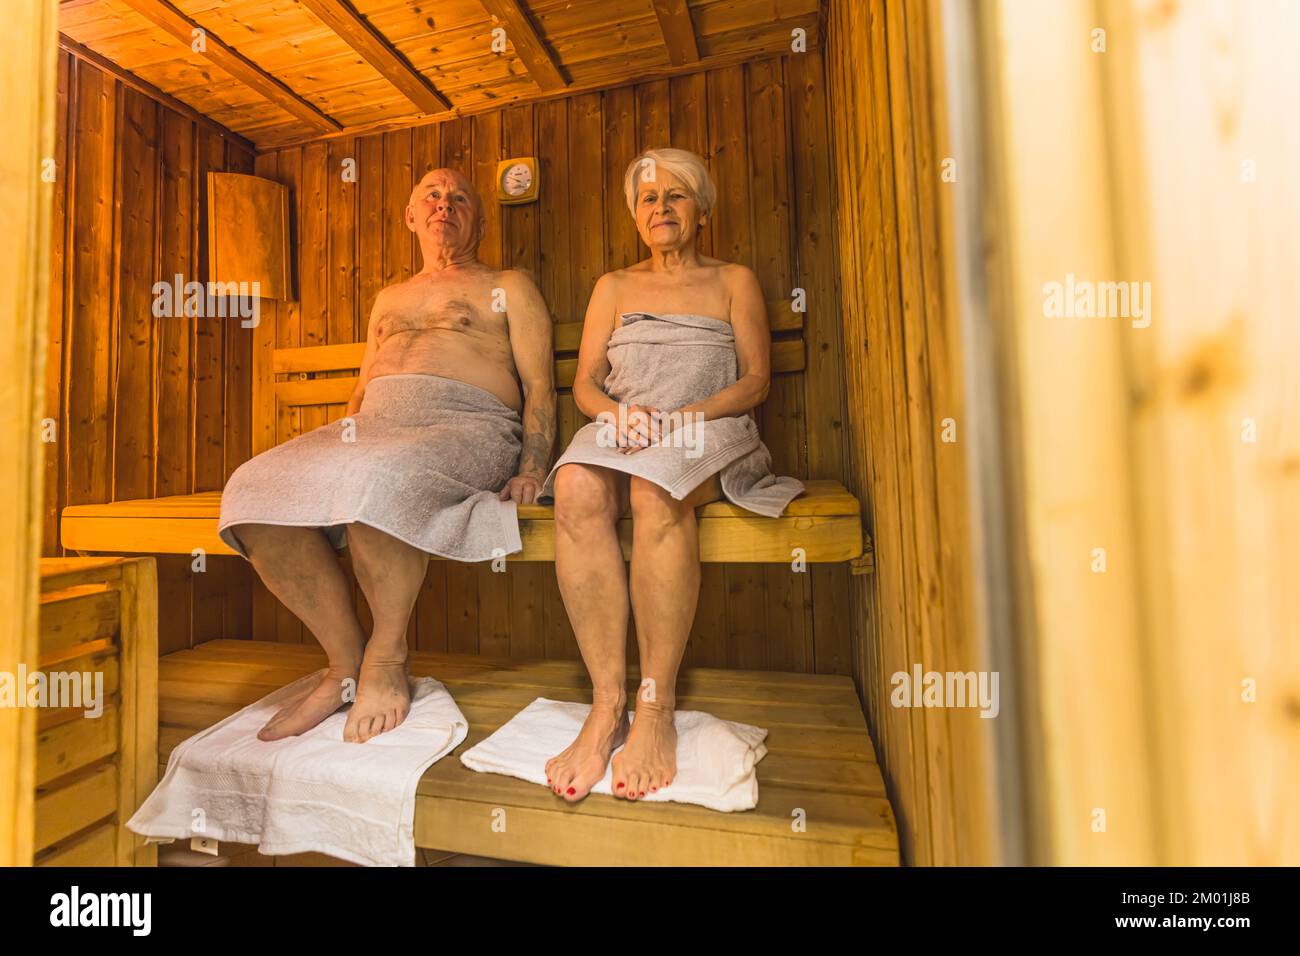 Leisure activity and relaxation concept. Full-length indoor shot of two white grandparents who sit in a wooden sauna with towels under their feet. High quality photo Stock Photo